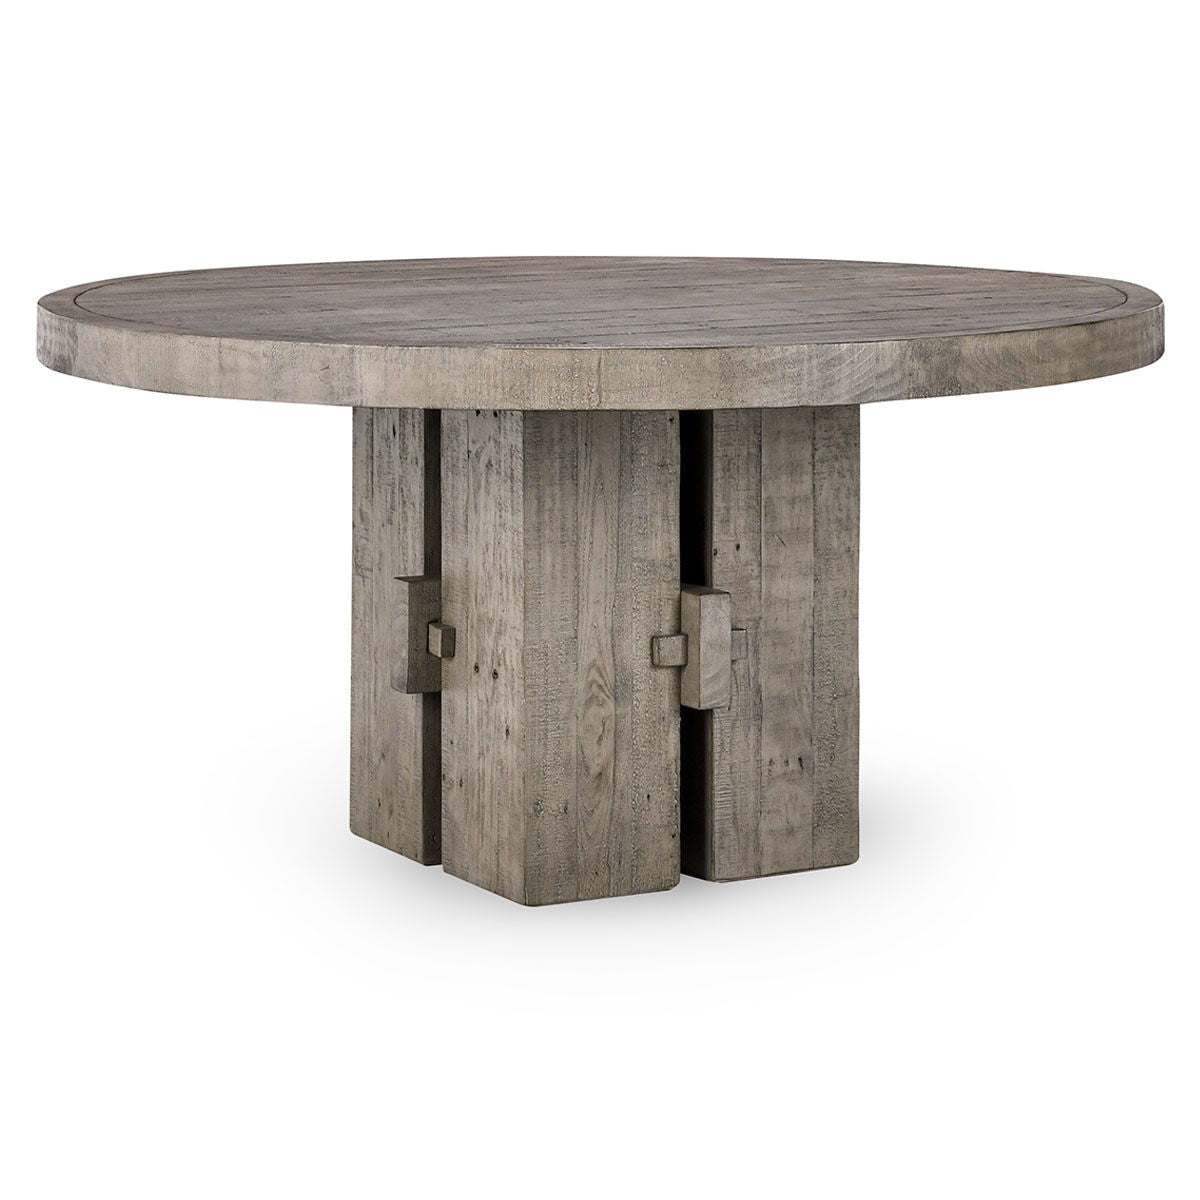 Trommald - Round Dining Table - Distressed Gray